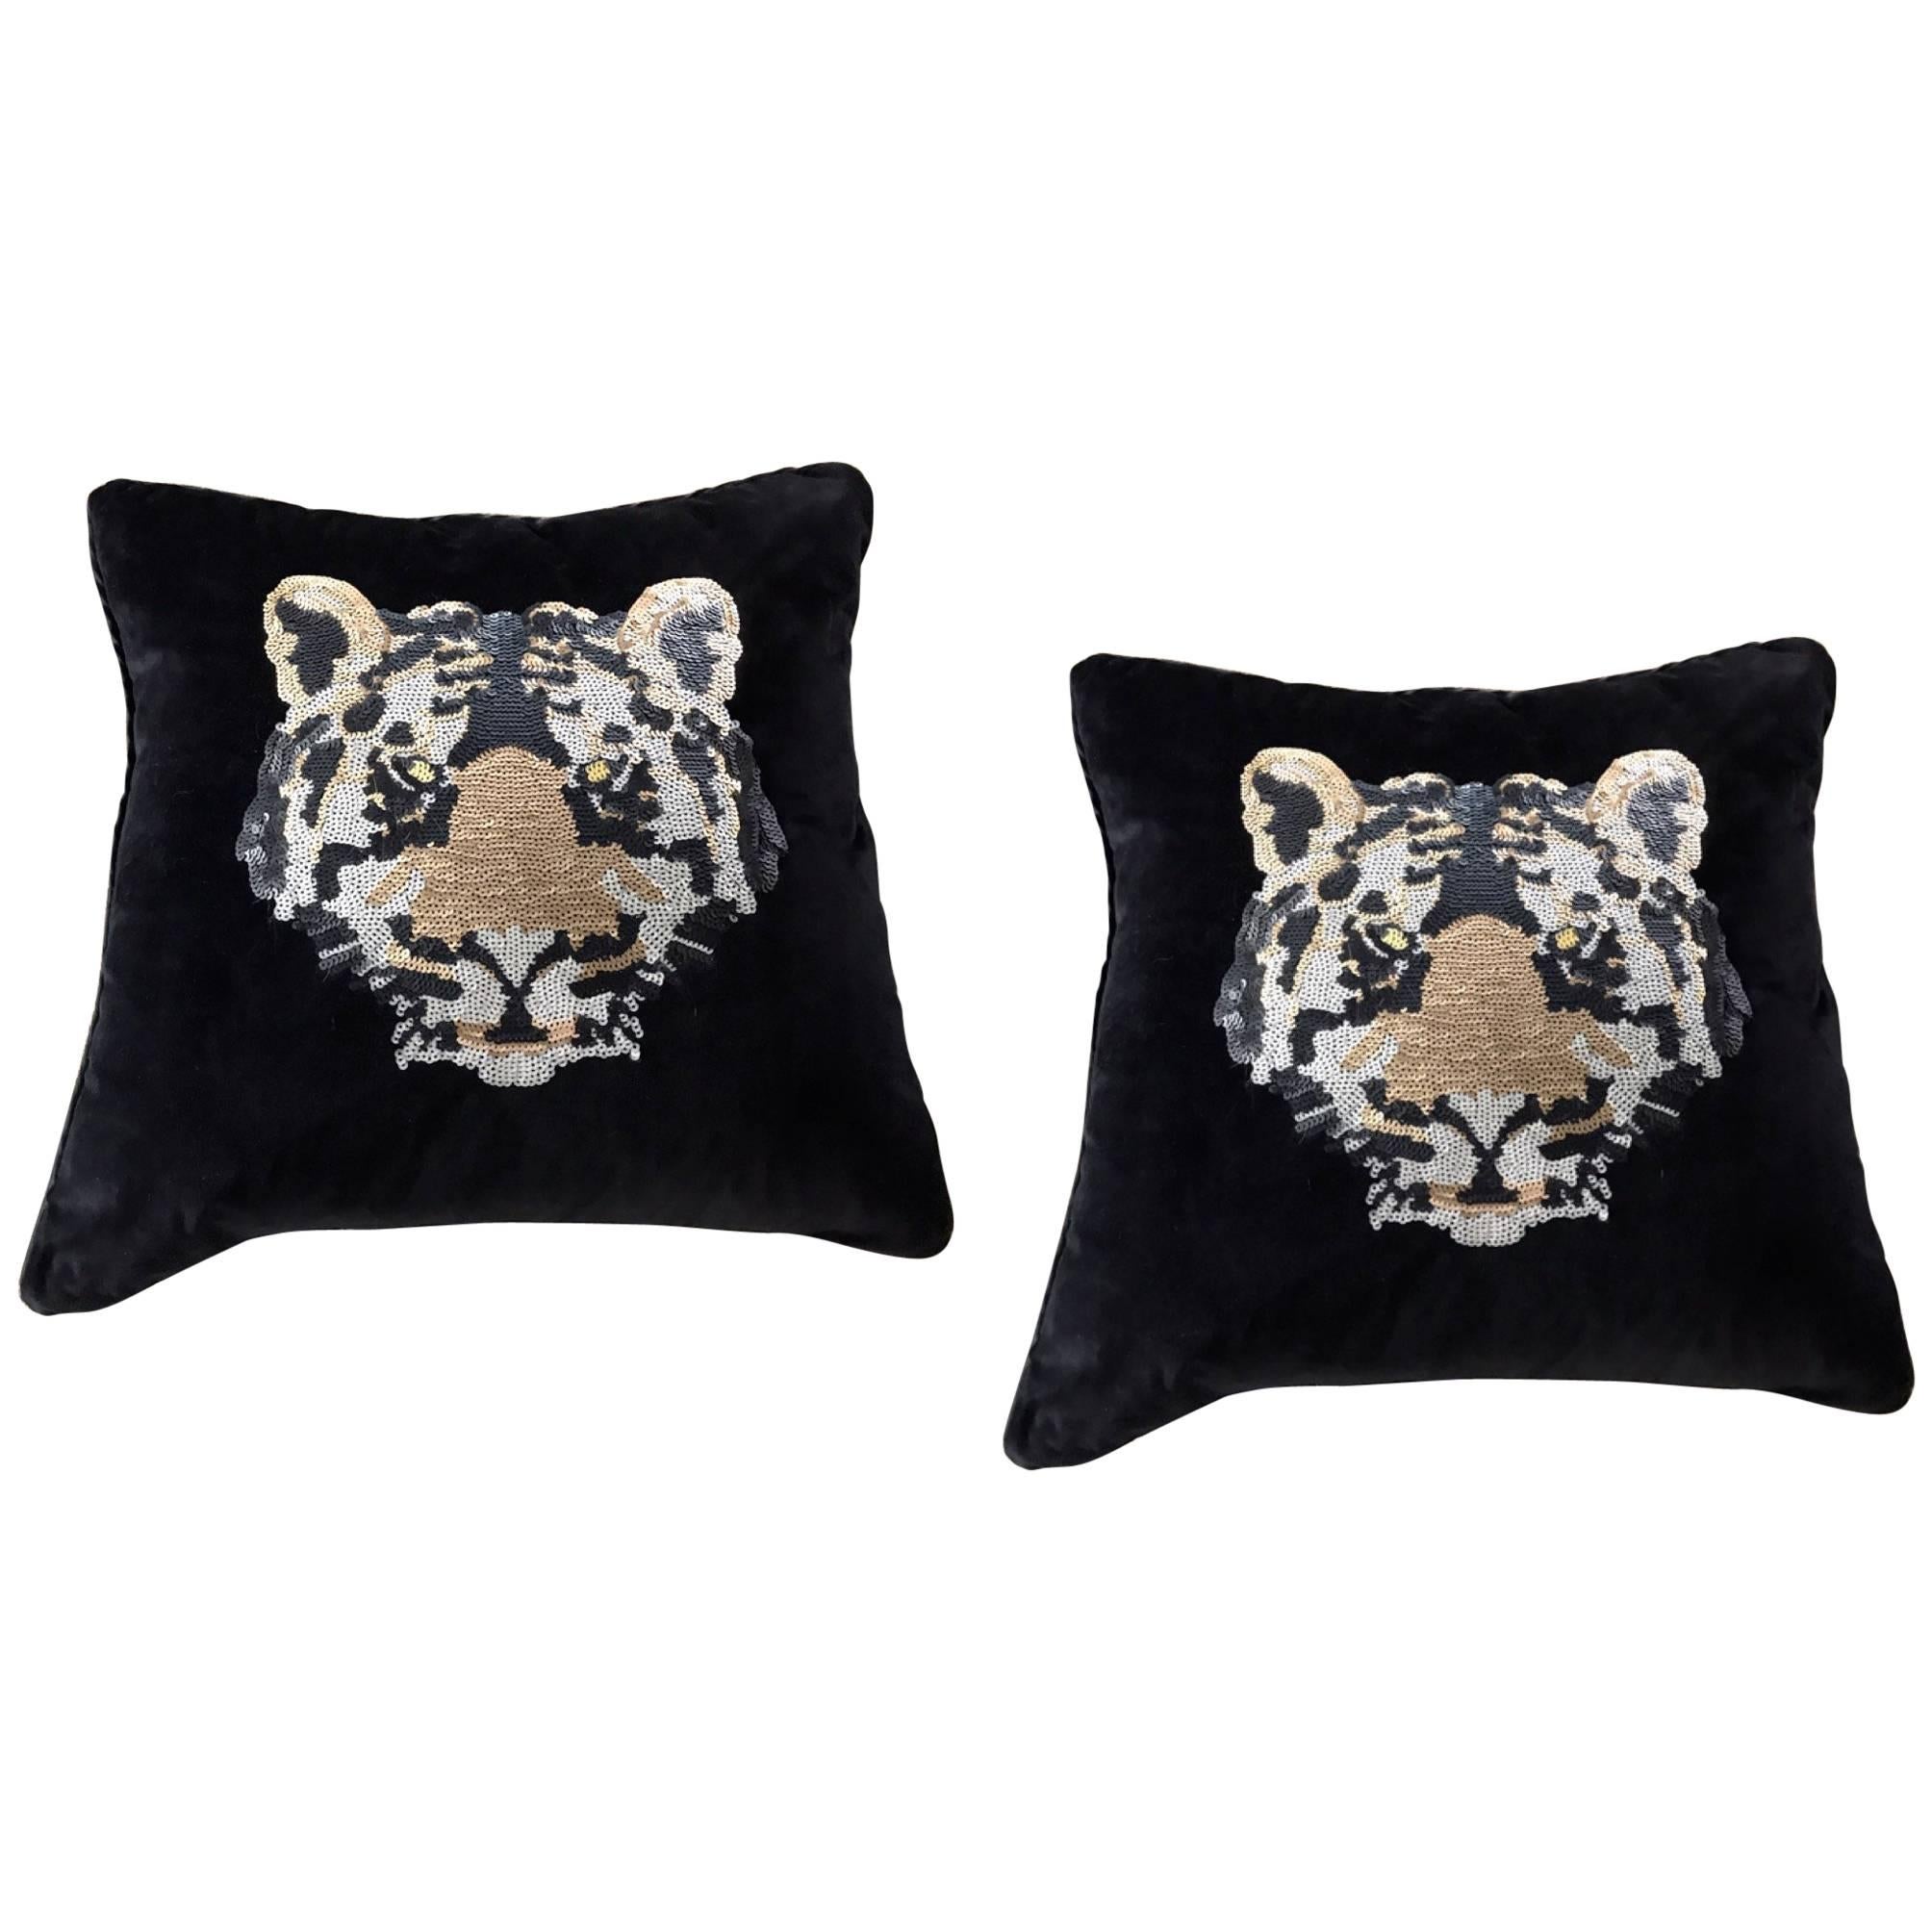 Pair of Luxe Black Velvet and Sequin Tiger Decorative Pillows